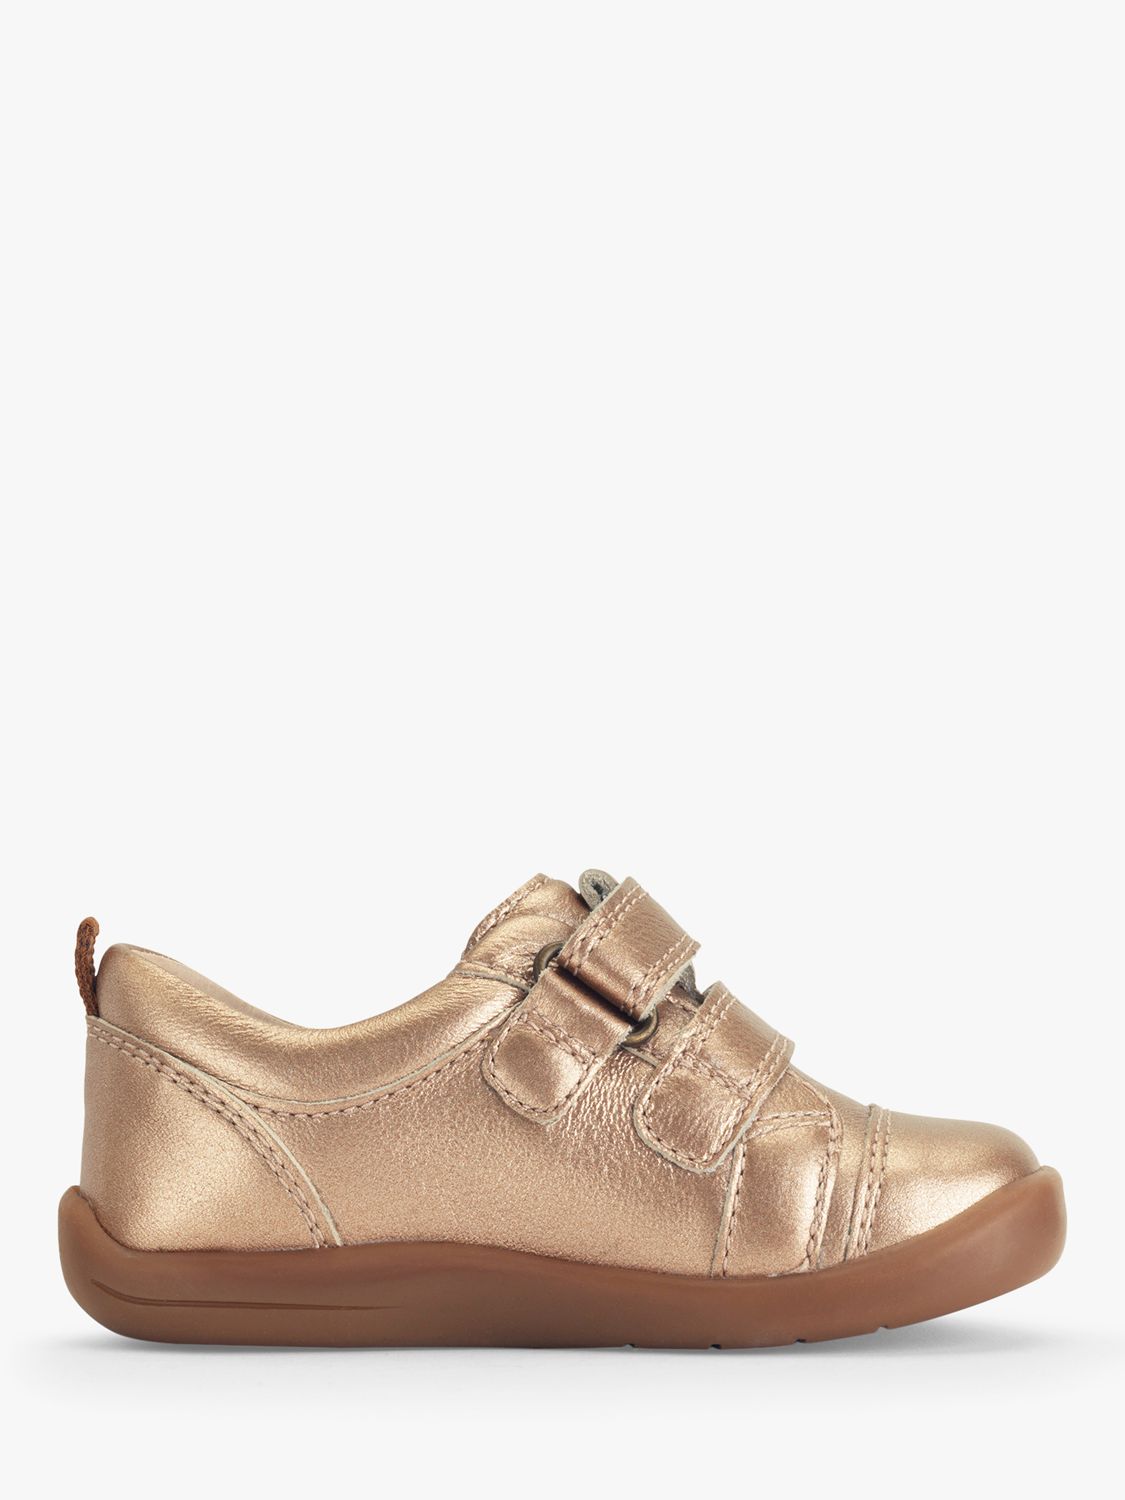 Buy Start-Rite Kids' Maze Leather Pre-Walker Trainers, Rose Gold Online at johnlewis.com